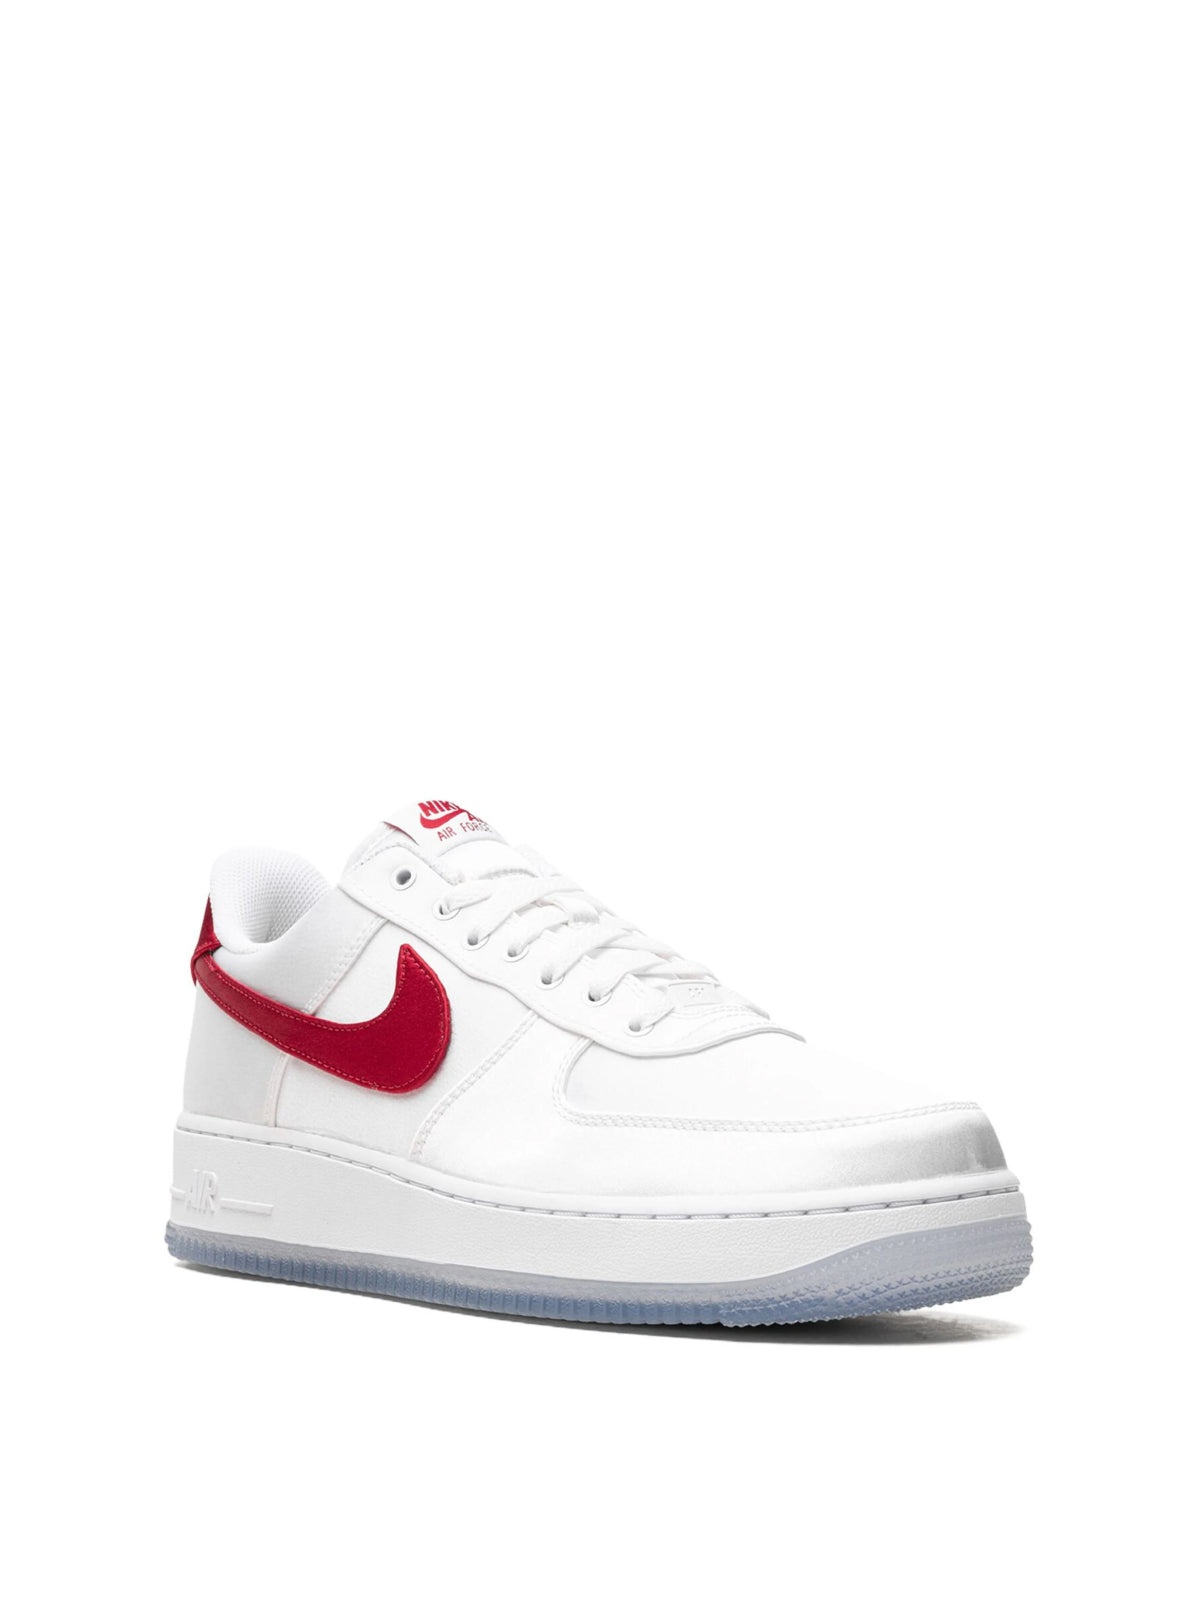 Nike-OUTLET-SALE-Air Force 1 '07 ESS SNKR Sneakers-ARCHIVIST